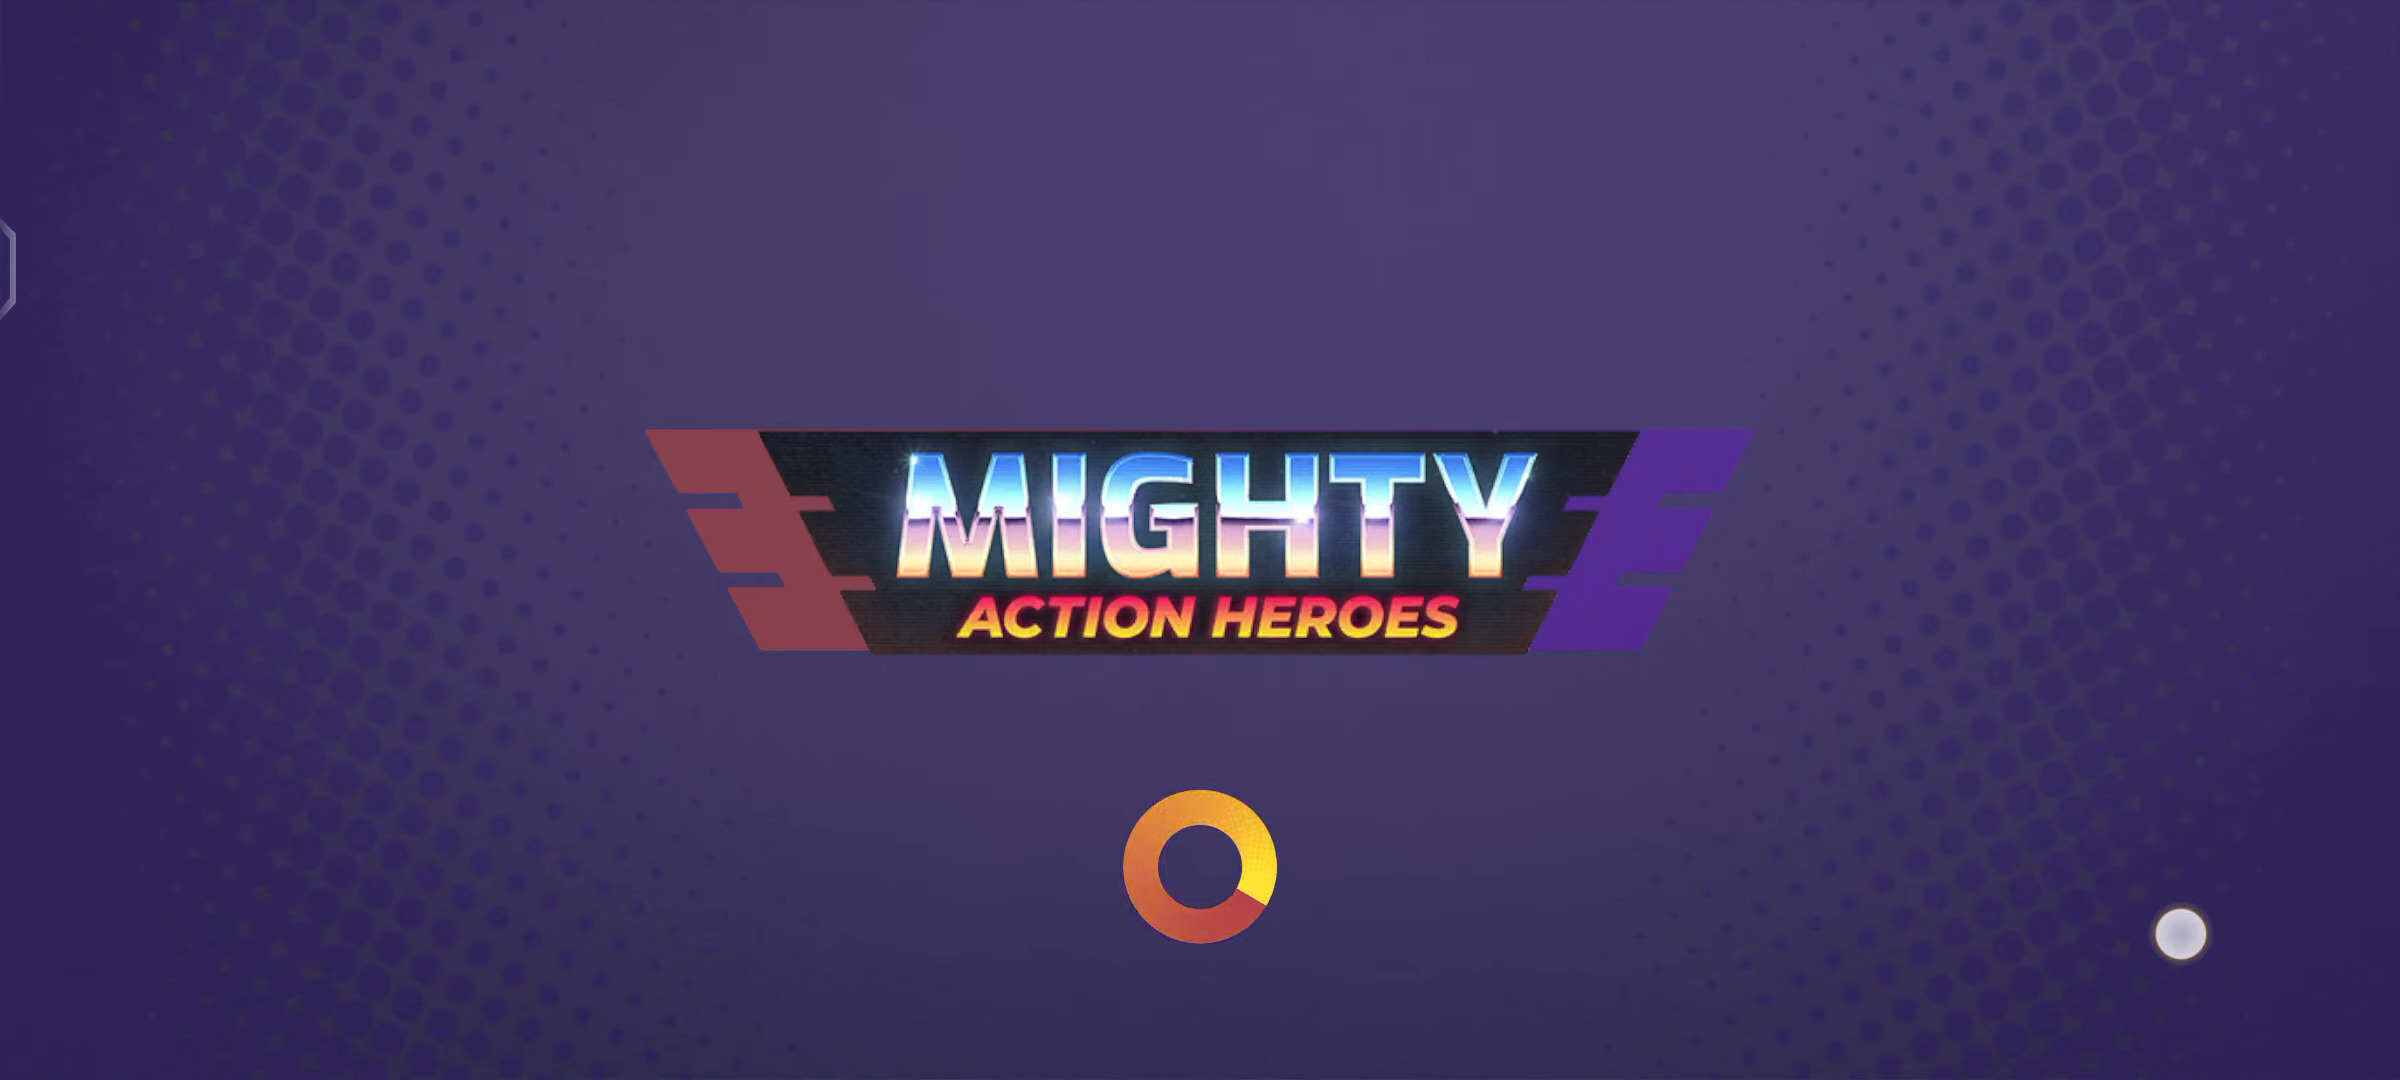 Télécharger Mighty Action Heroes pour Android gratuit.